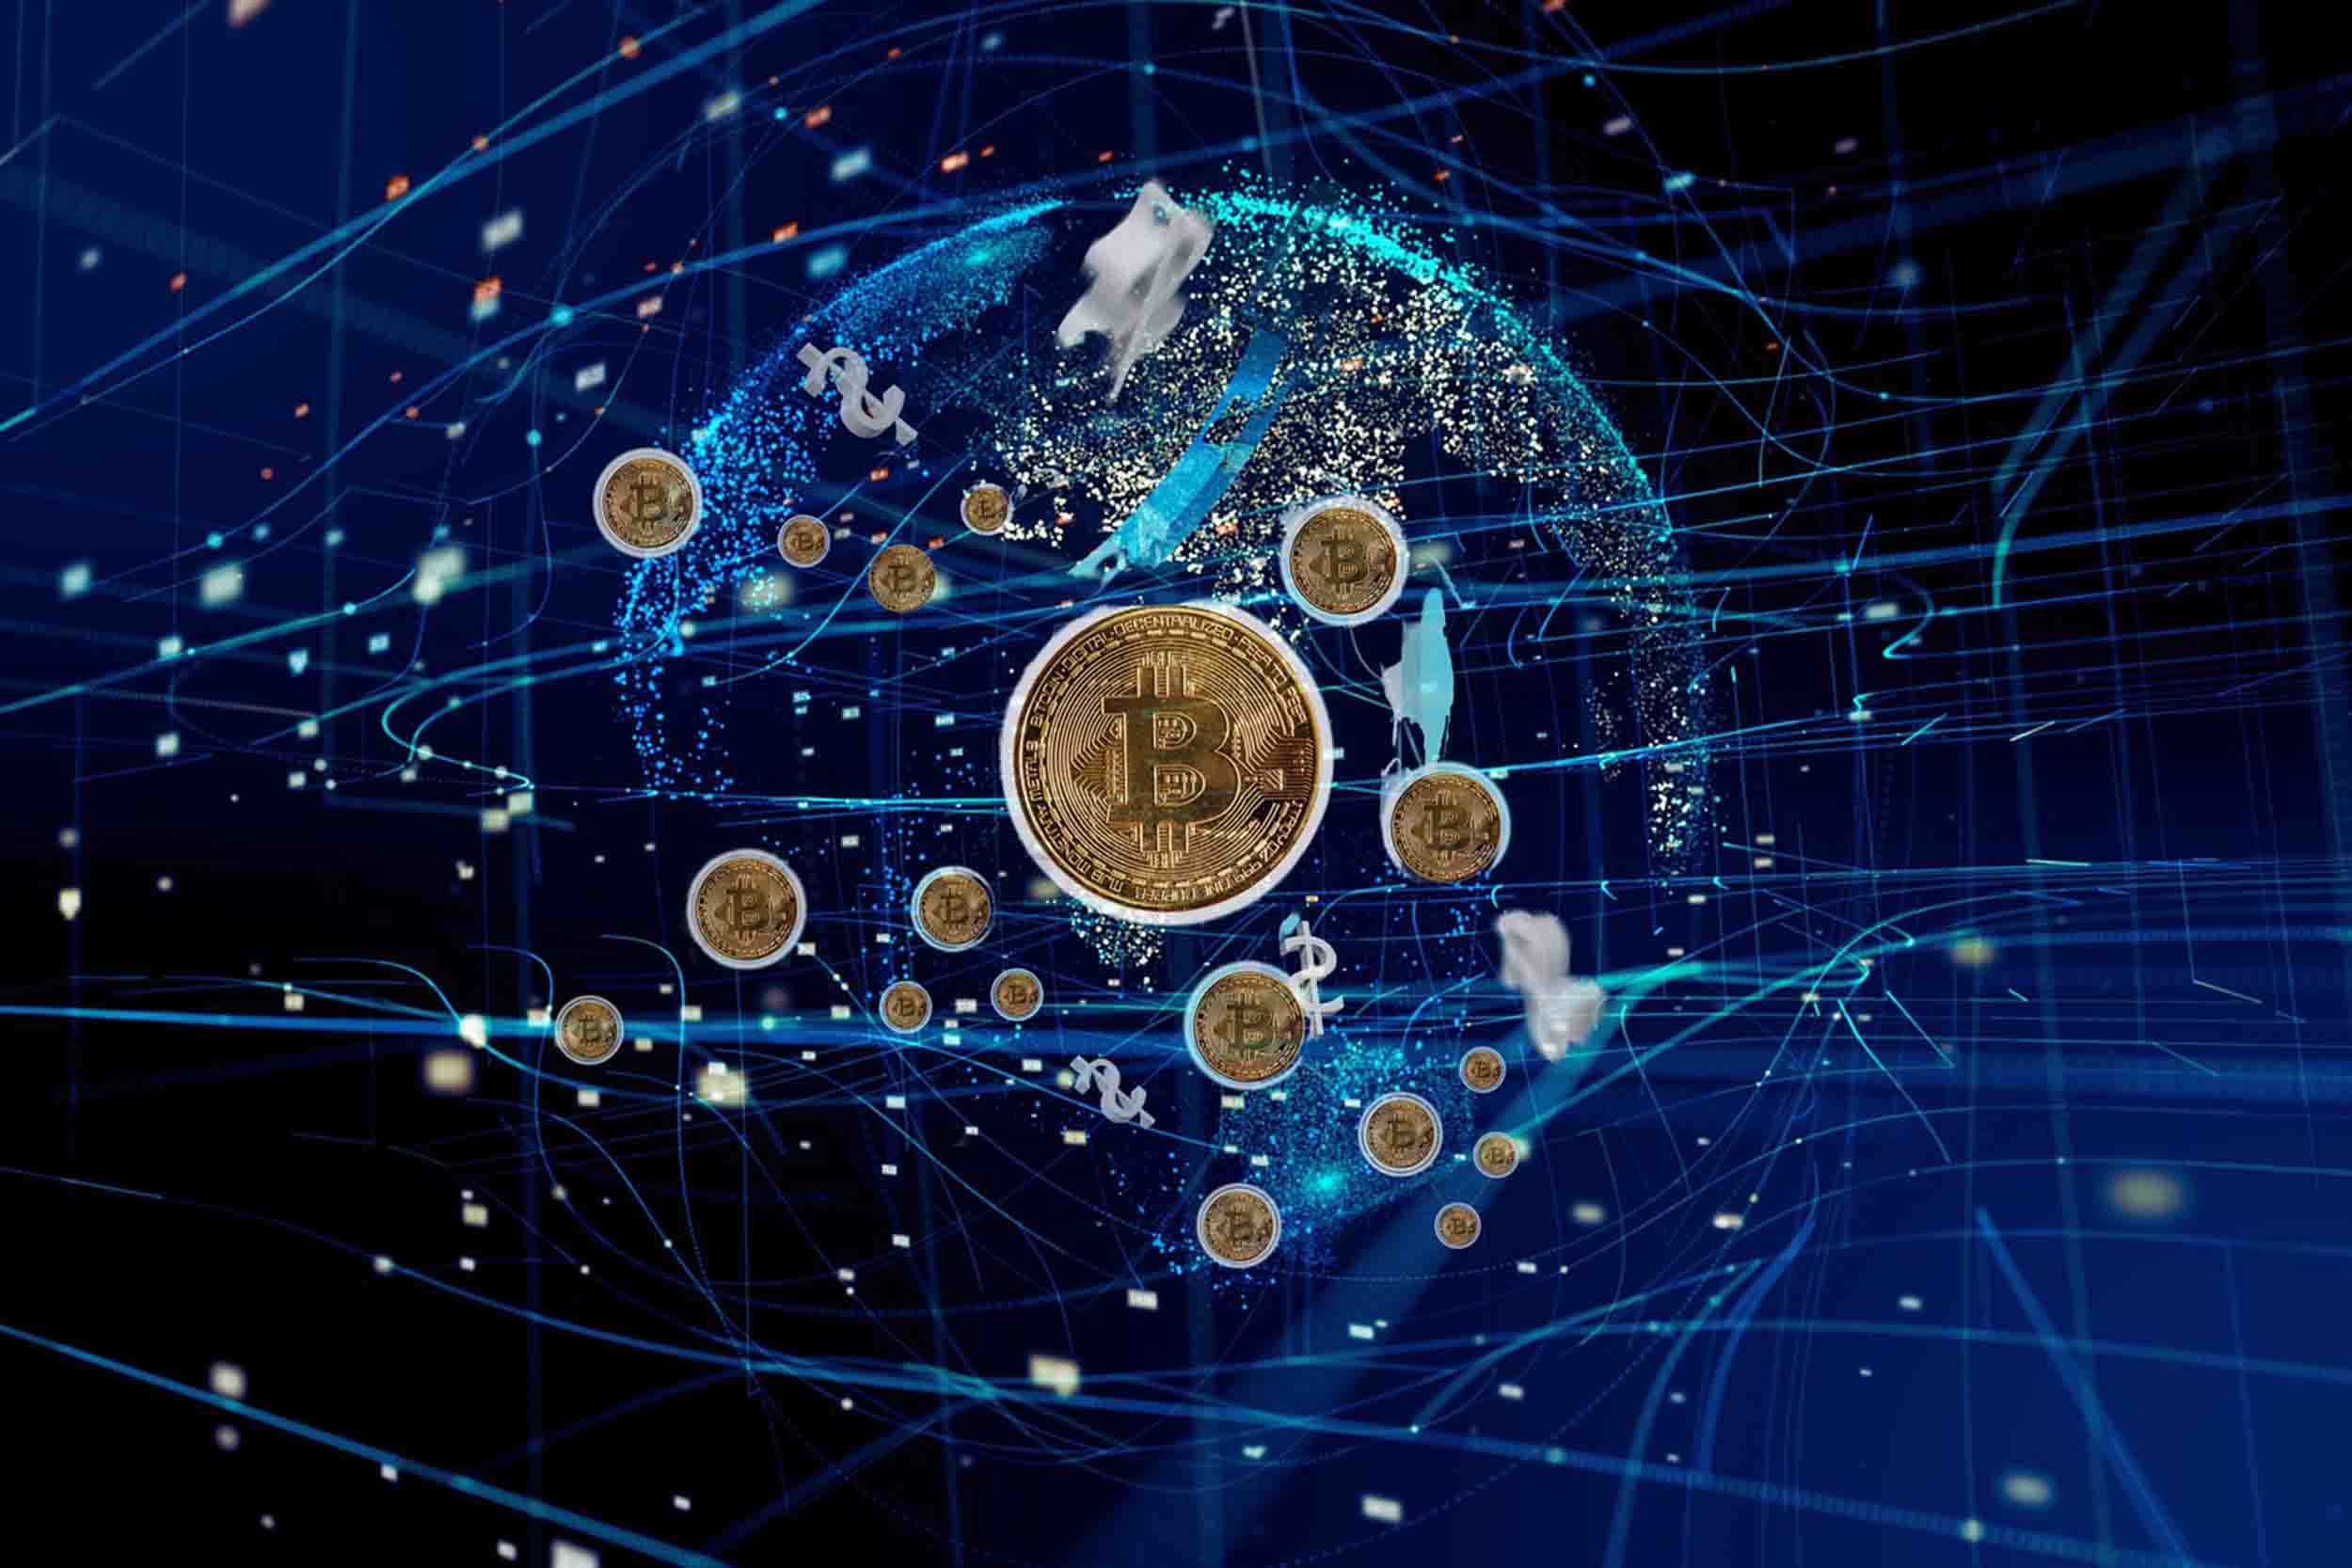 Stock image melding imagery from cryptocurrency, dollars, global connections and space